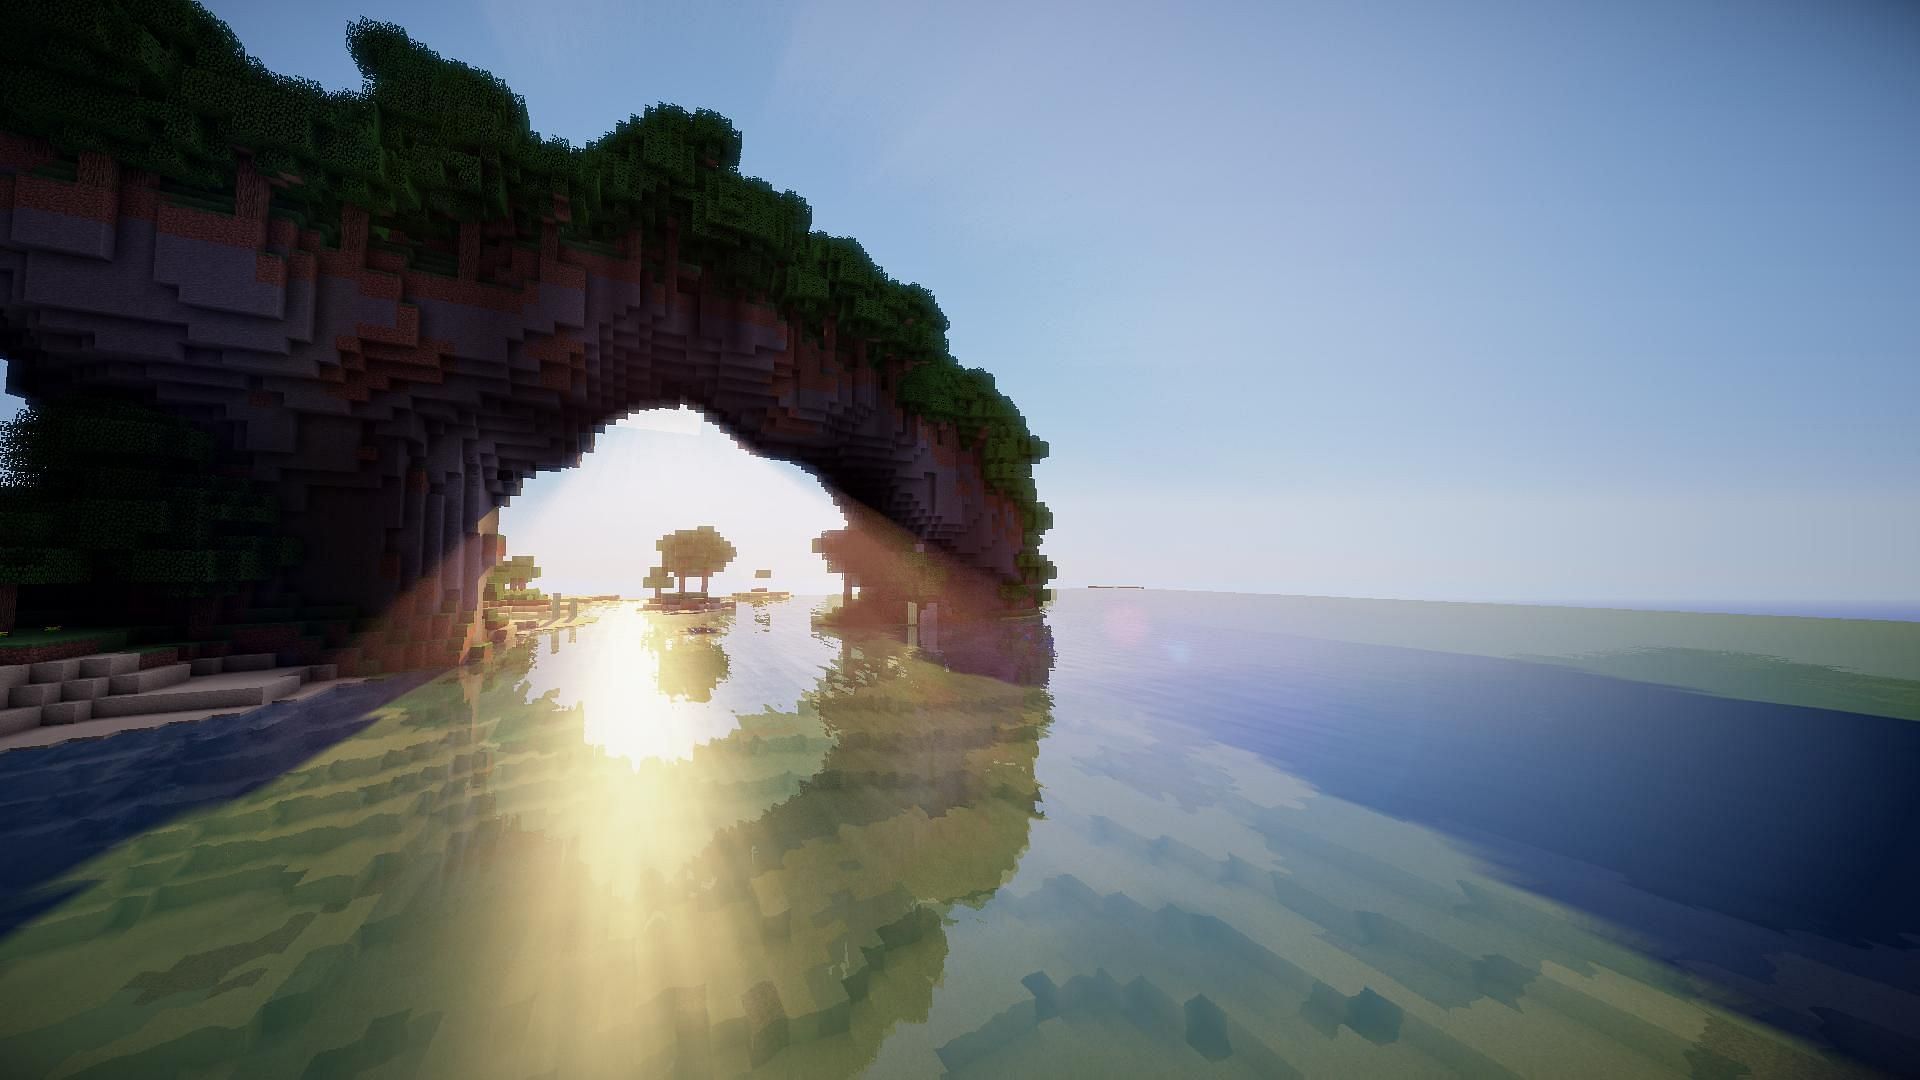 Minecraft with shaders on [Image via Pinterest]